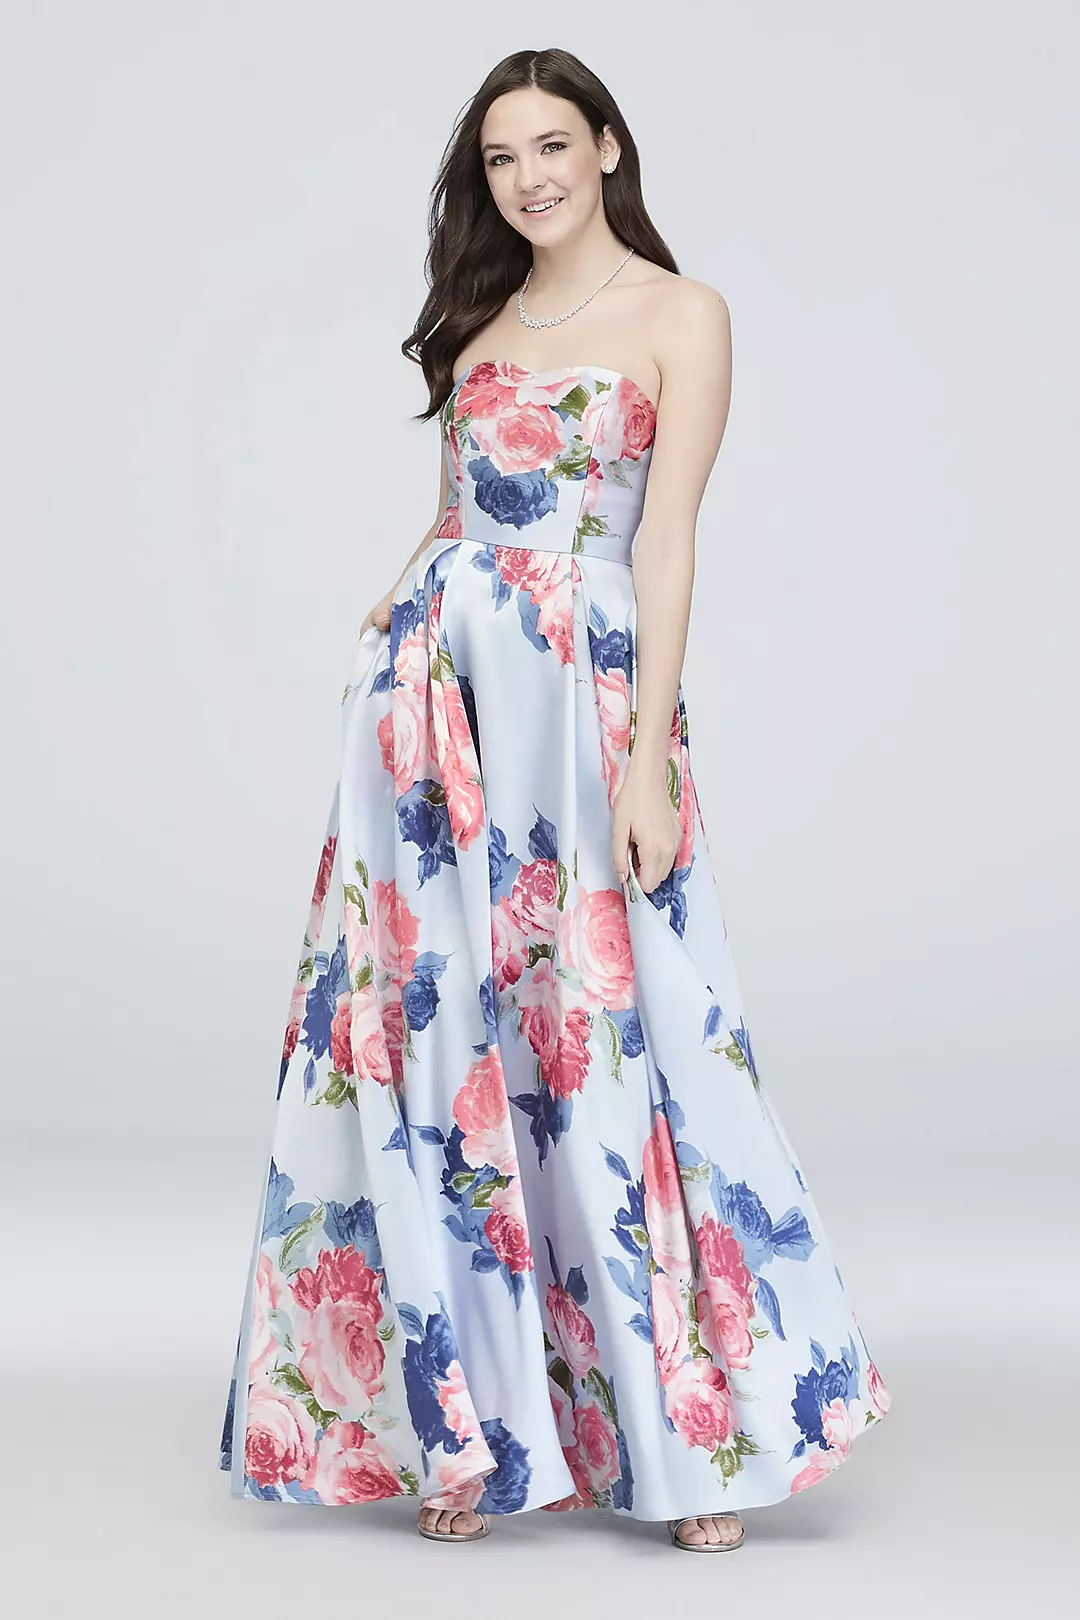 Floral Sweetheart Strapless Ball Gown with Pockets Image